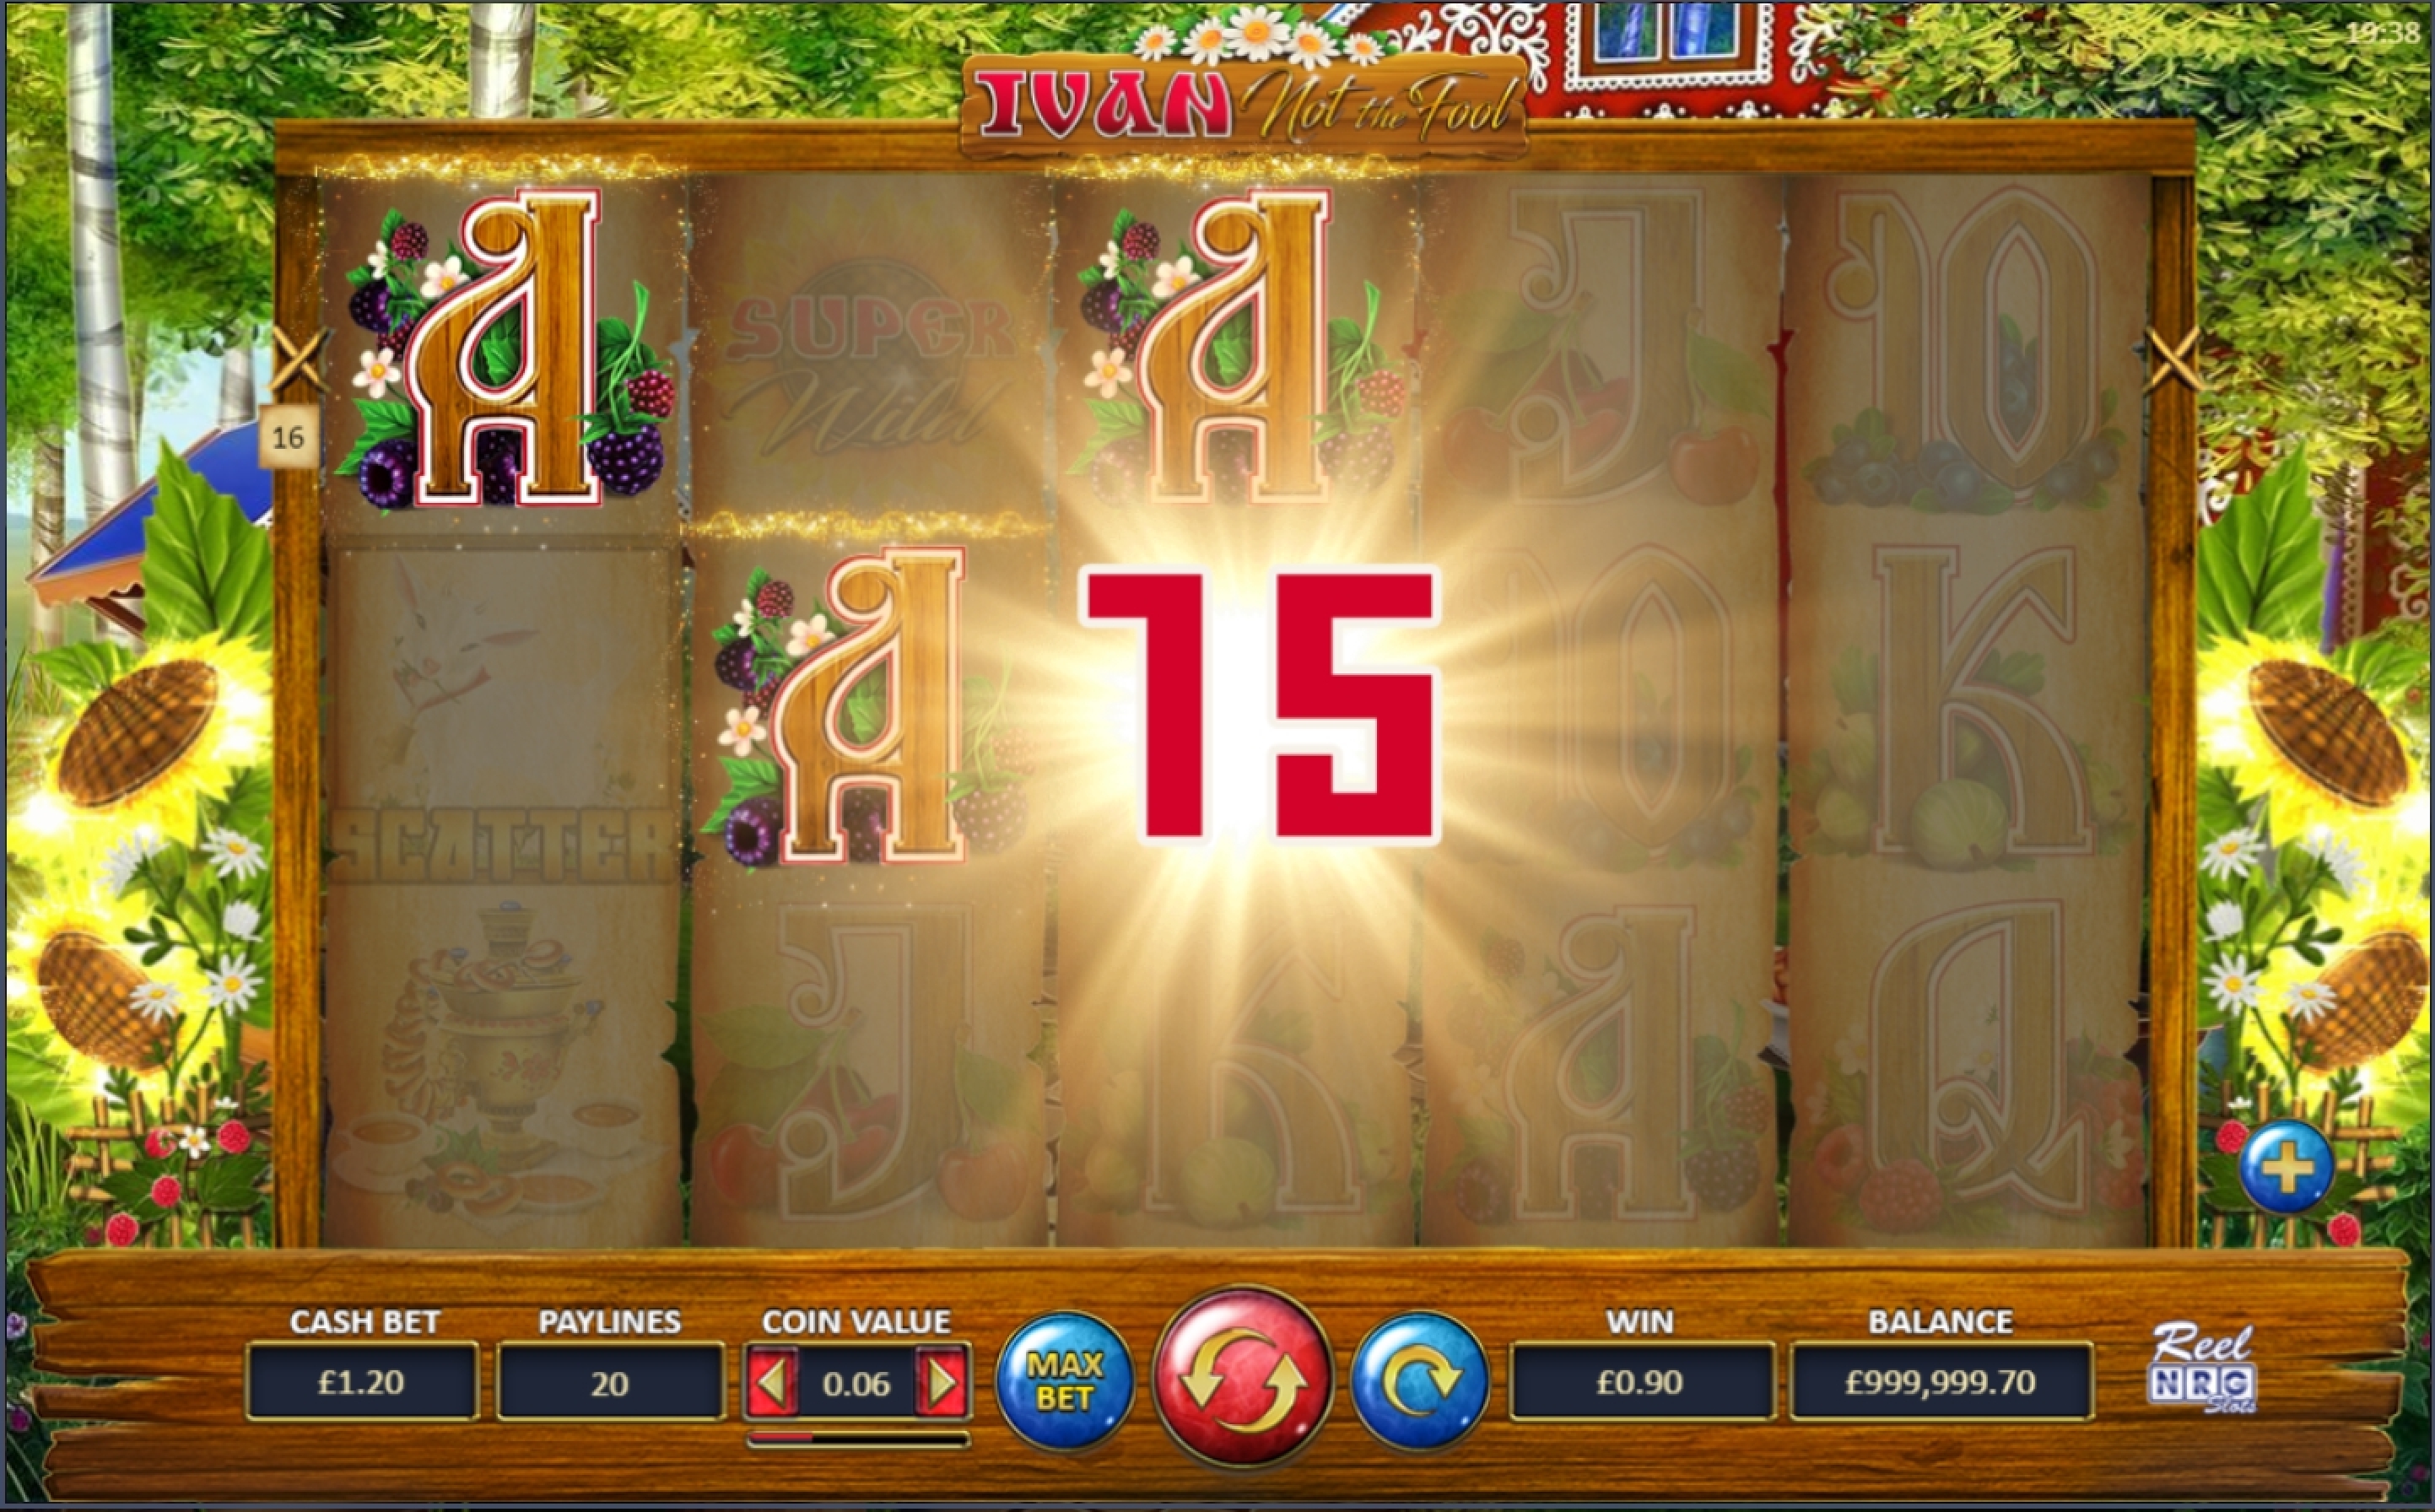 Win Money in Ivan Not The Fool Free Slot Game by ReelNRG Gaming